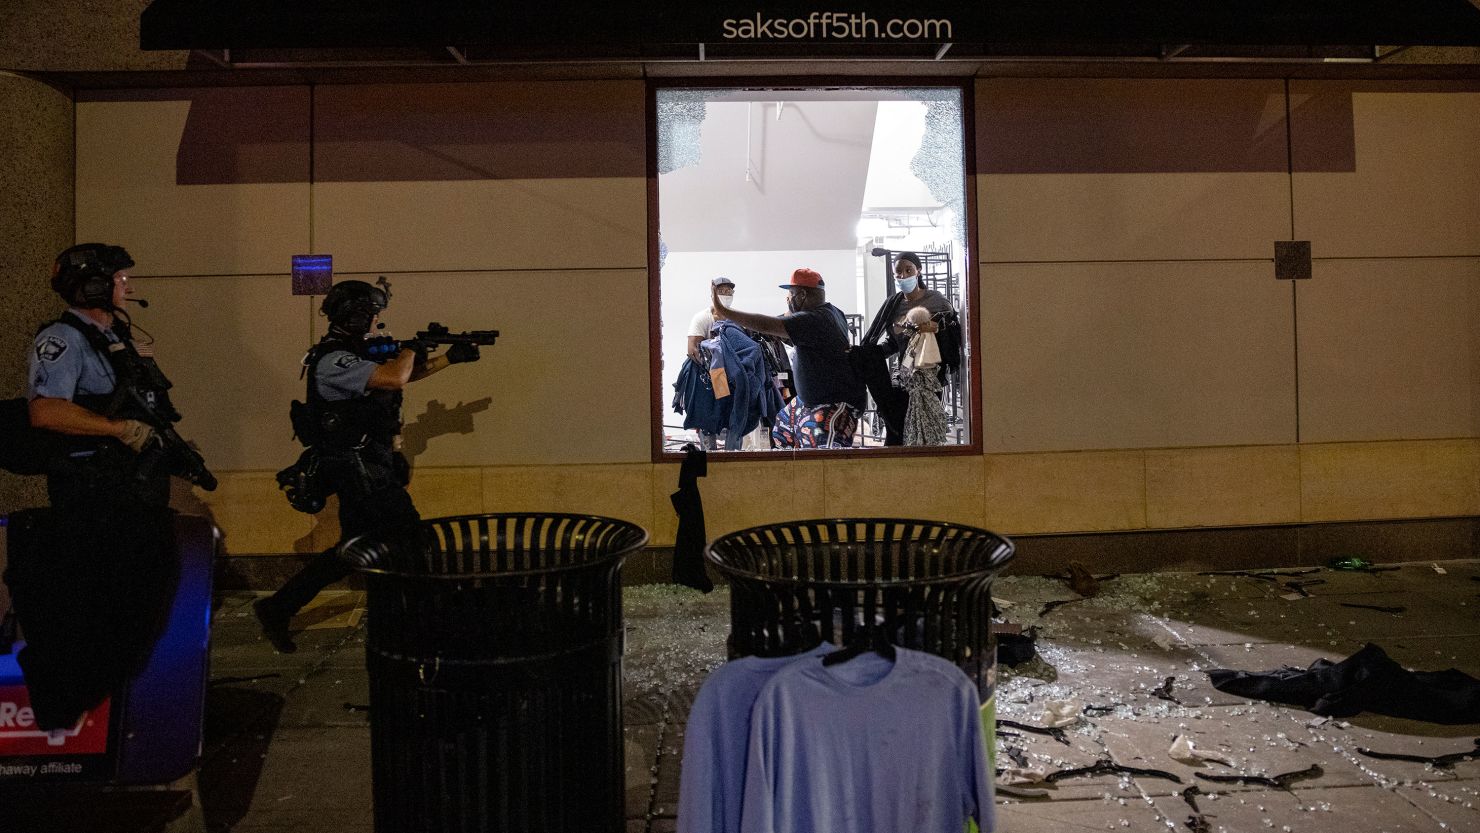 Police clear out and secure a Saks OFF 5th store in Minneapolis on August 26.